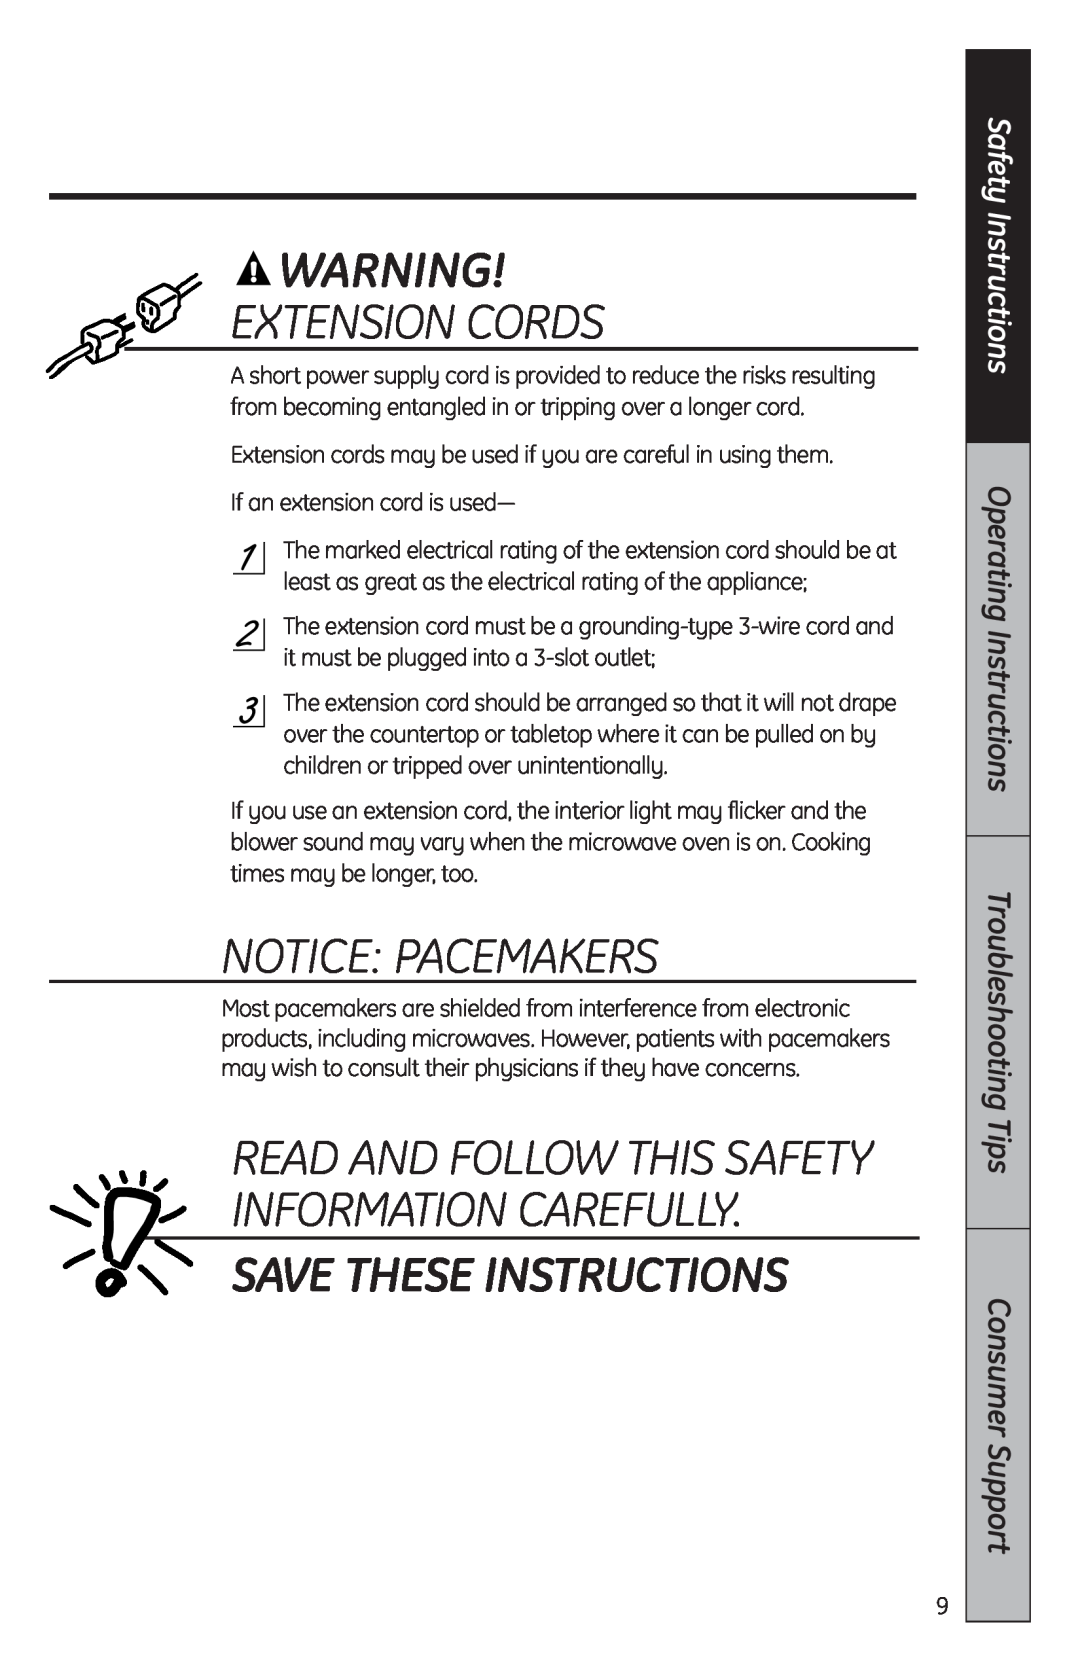 GE JES2051 Extension Cords, Notice Pacemakers, Save These Instructions, Read And Follow This Safety Information Carefully 